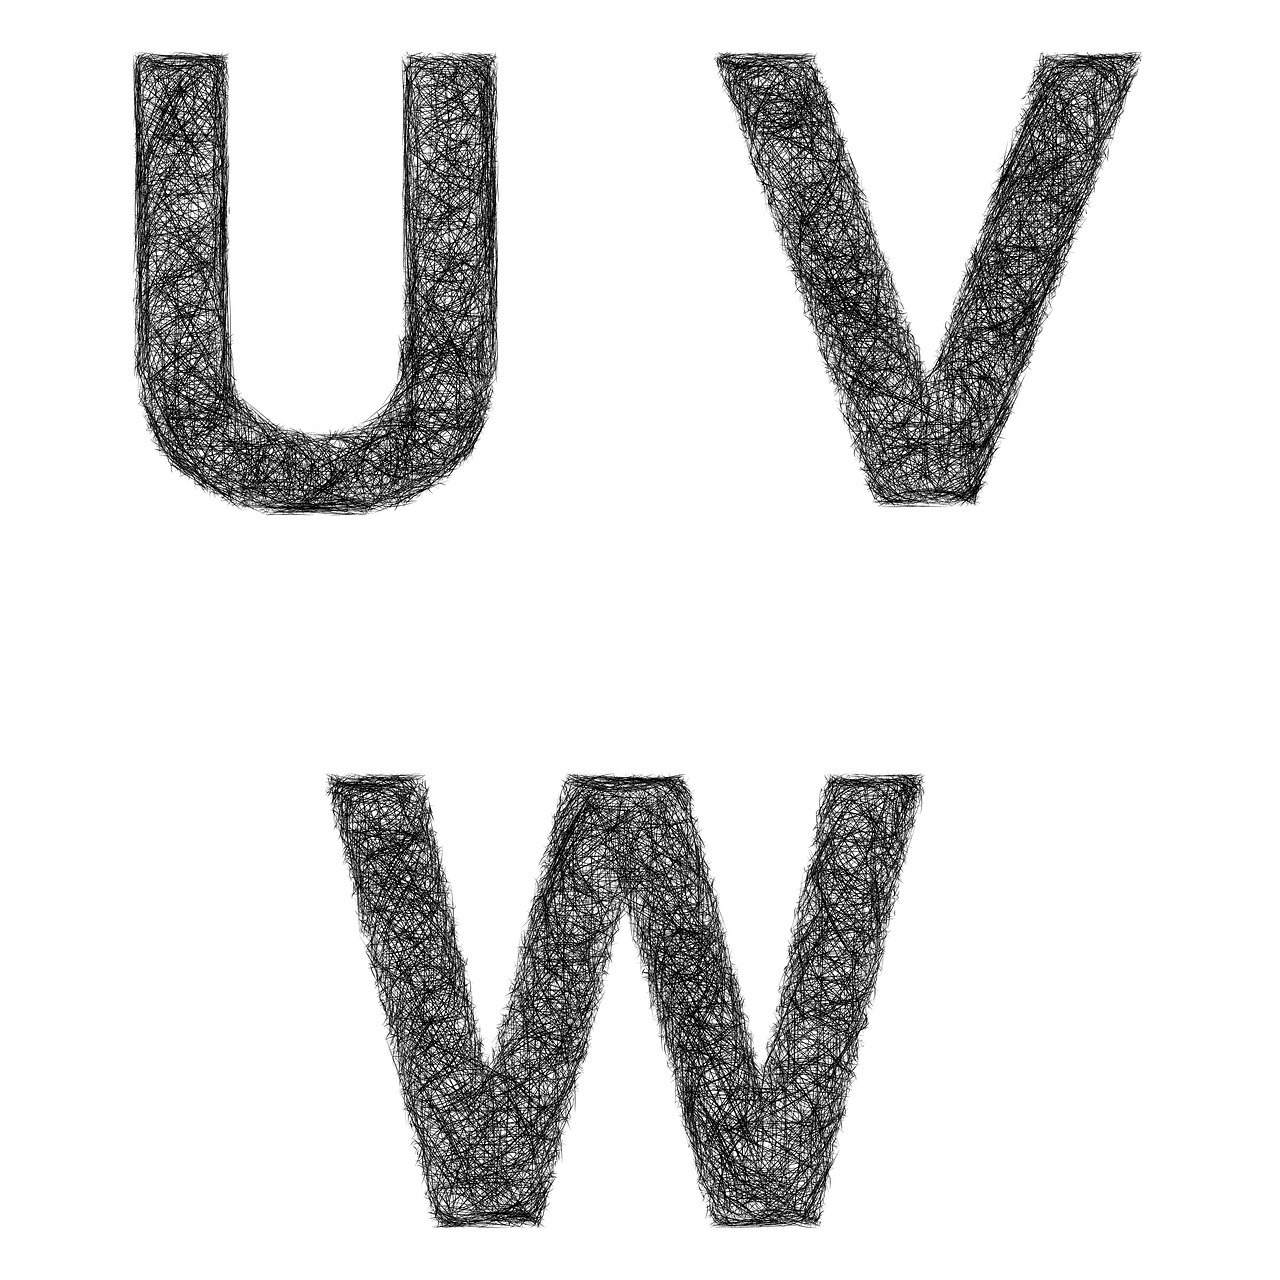 the letters U V and Q in pencil